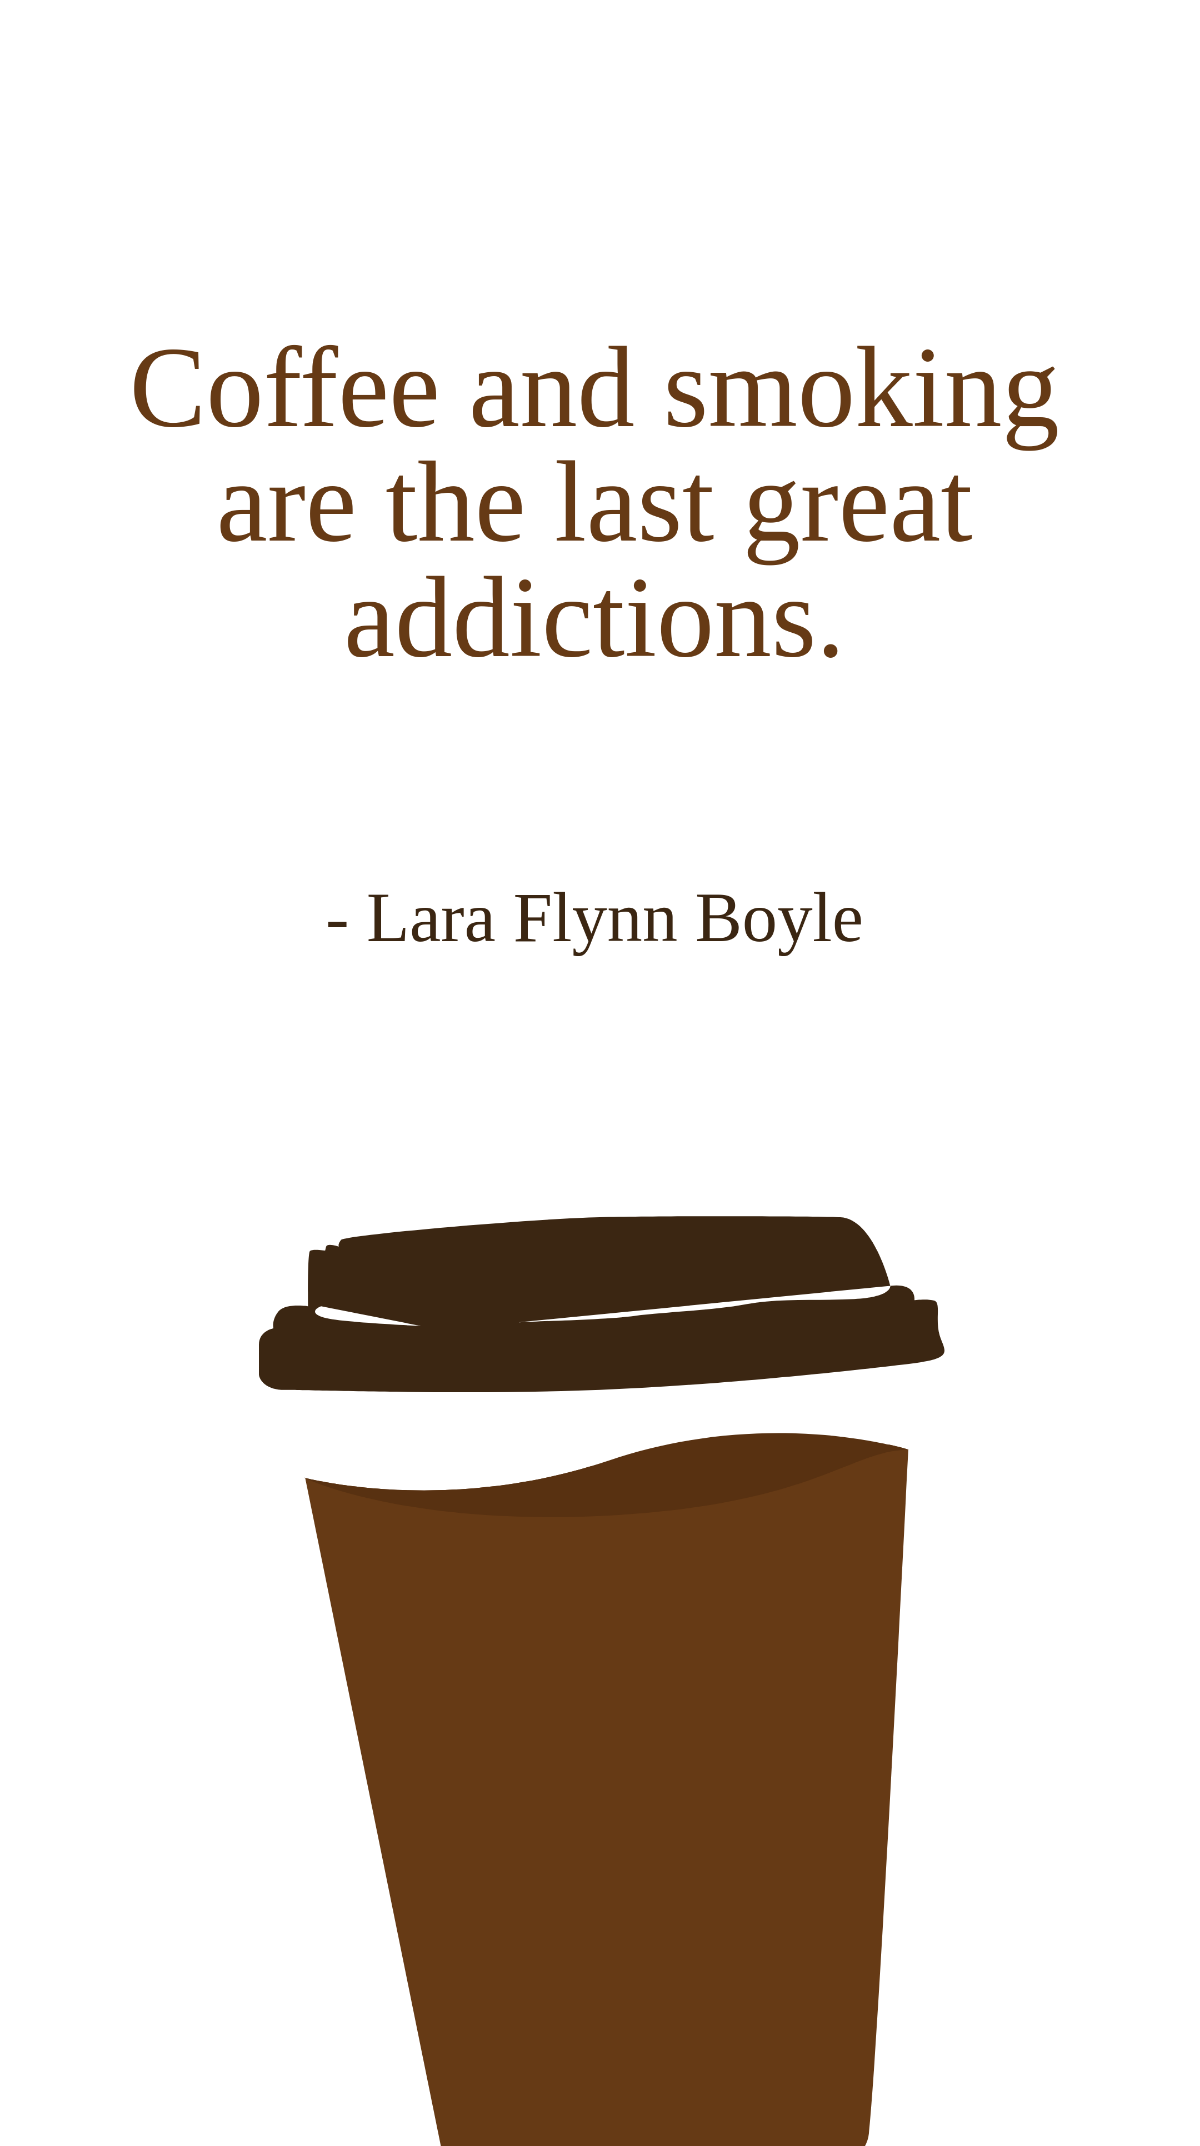 Free Lara Flynn Boyle - Coffee and smoking are the last great addictions. Template